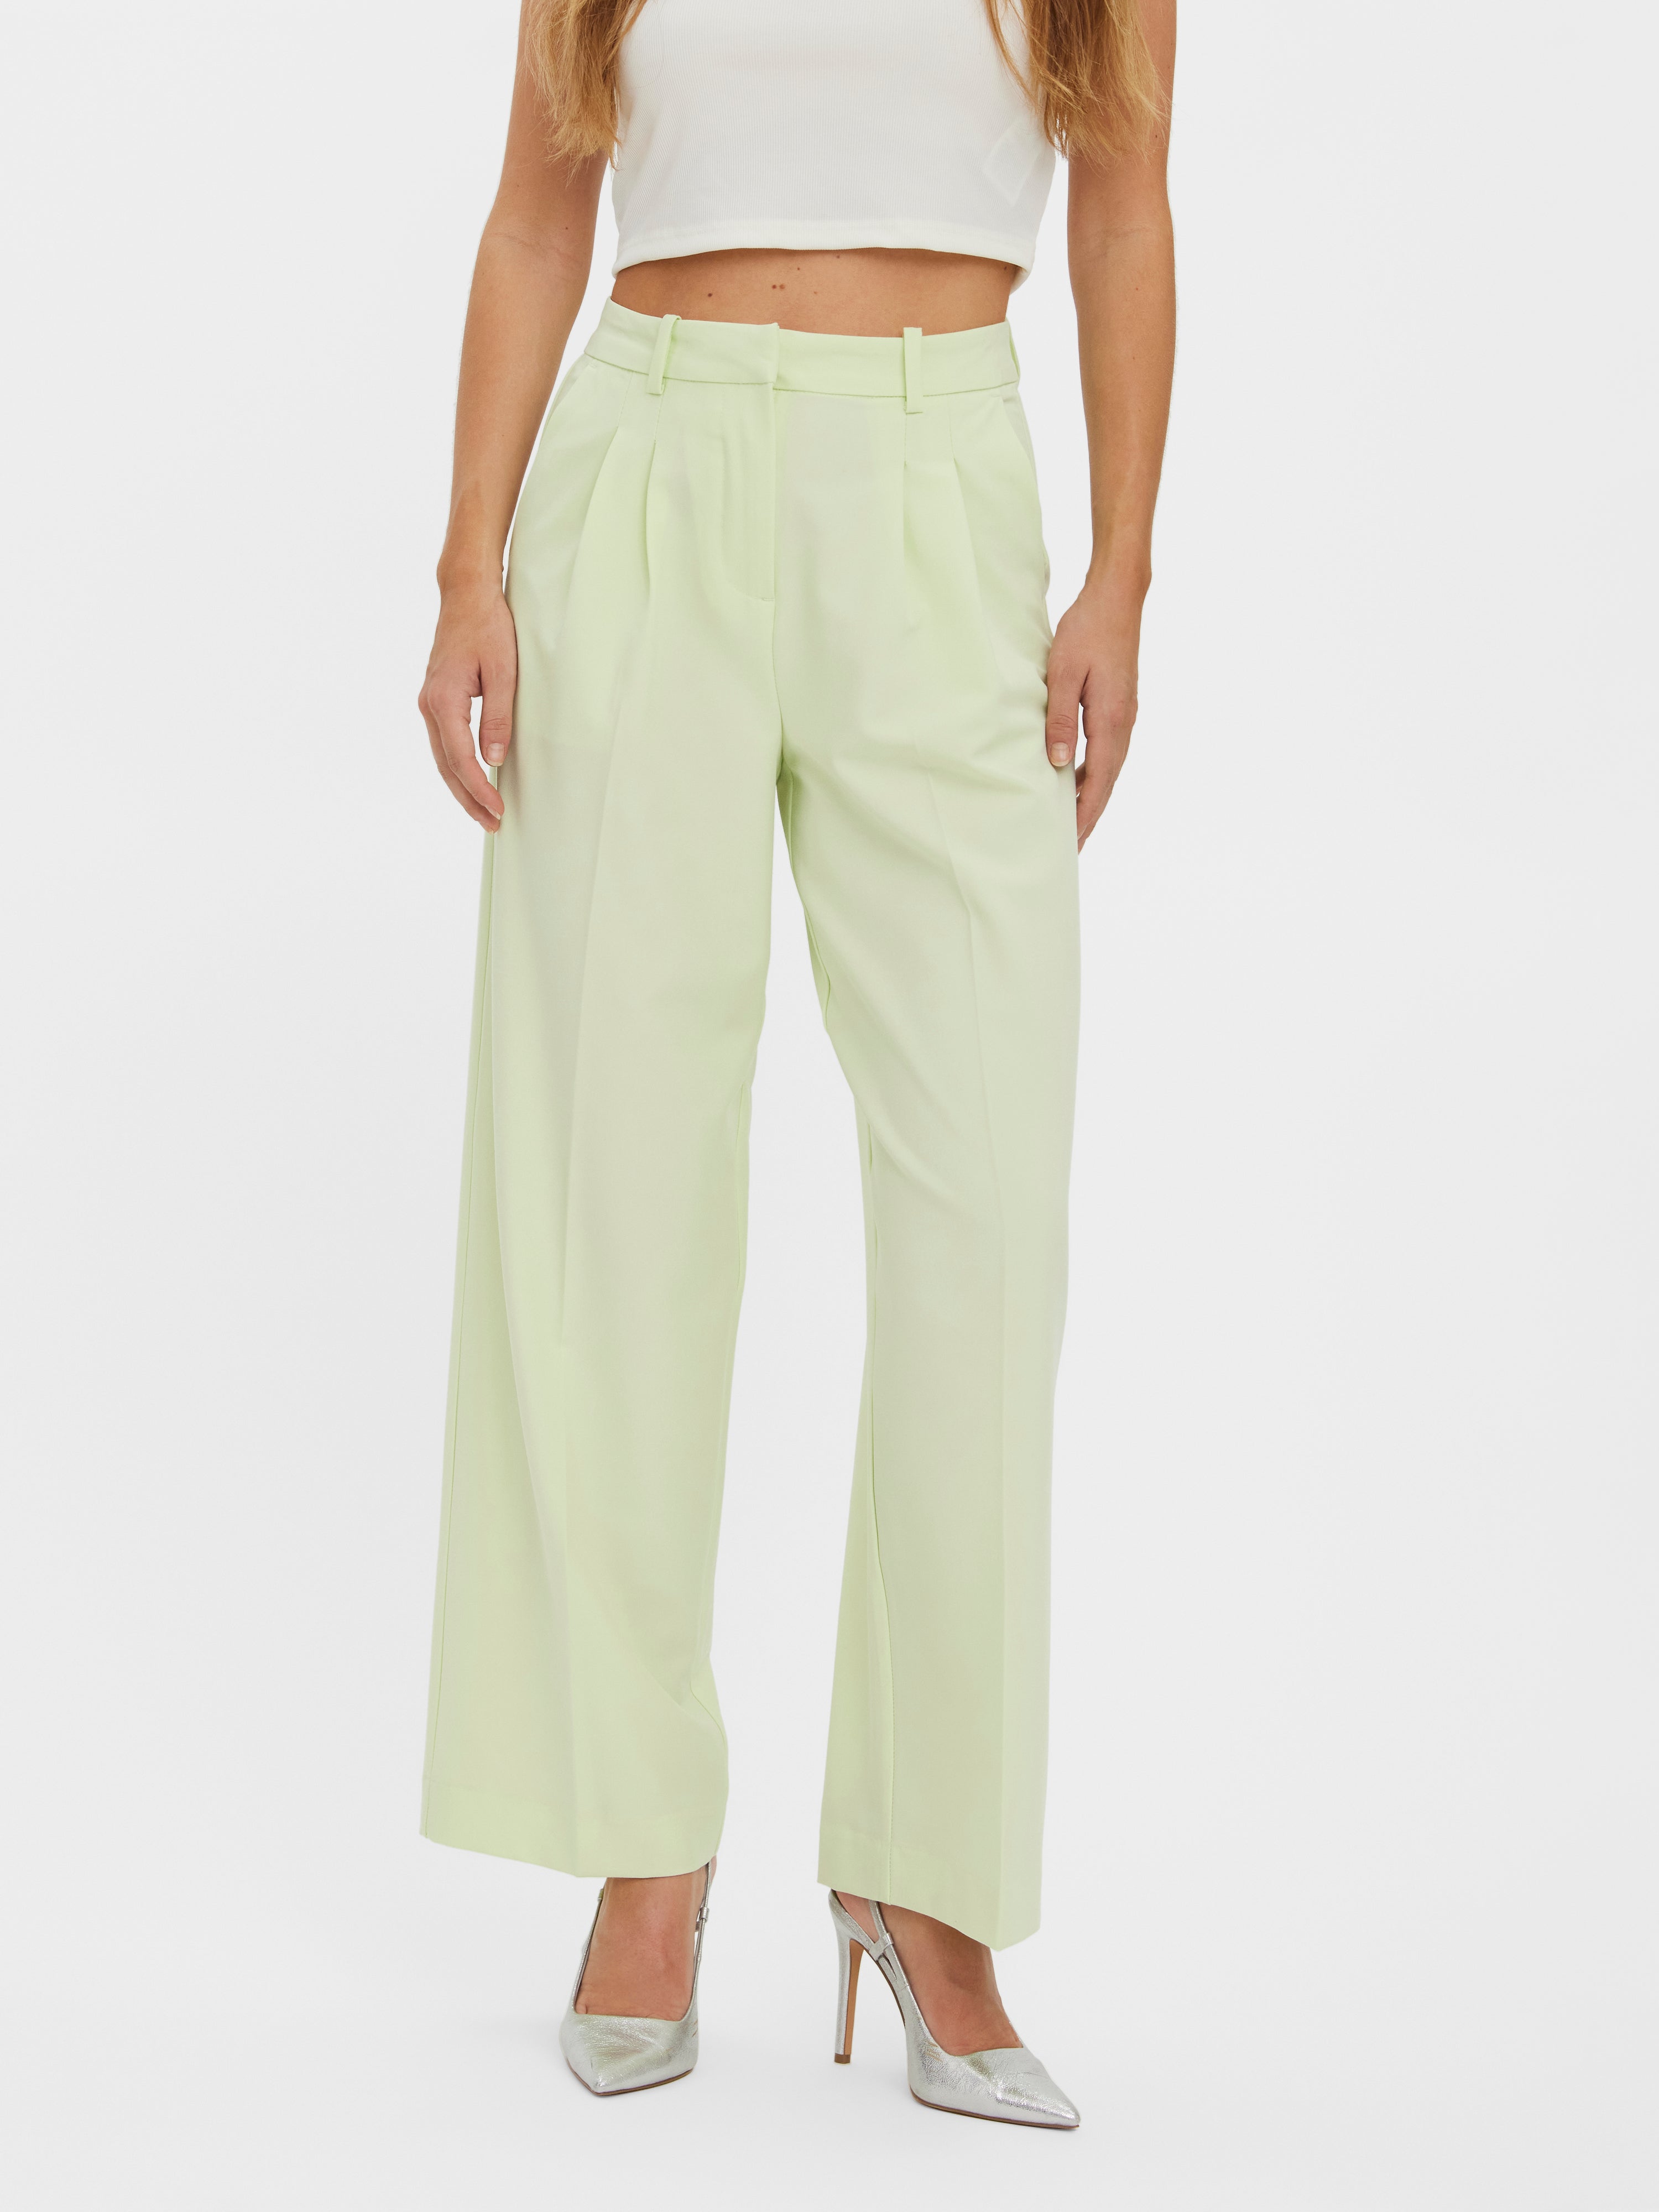 Buy VERO MODA Blue Solid Cotton Relaxed Fit Womens Pants  Shoppers Stop